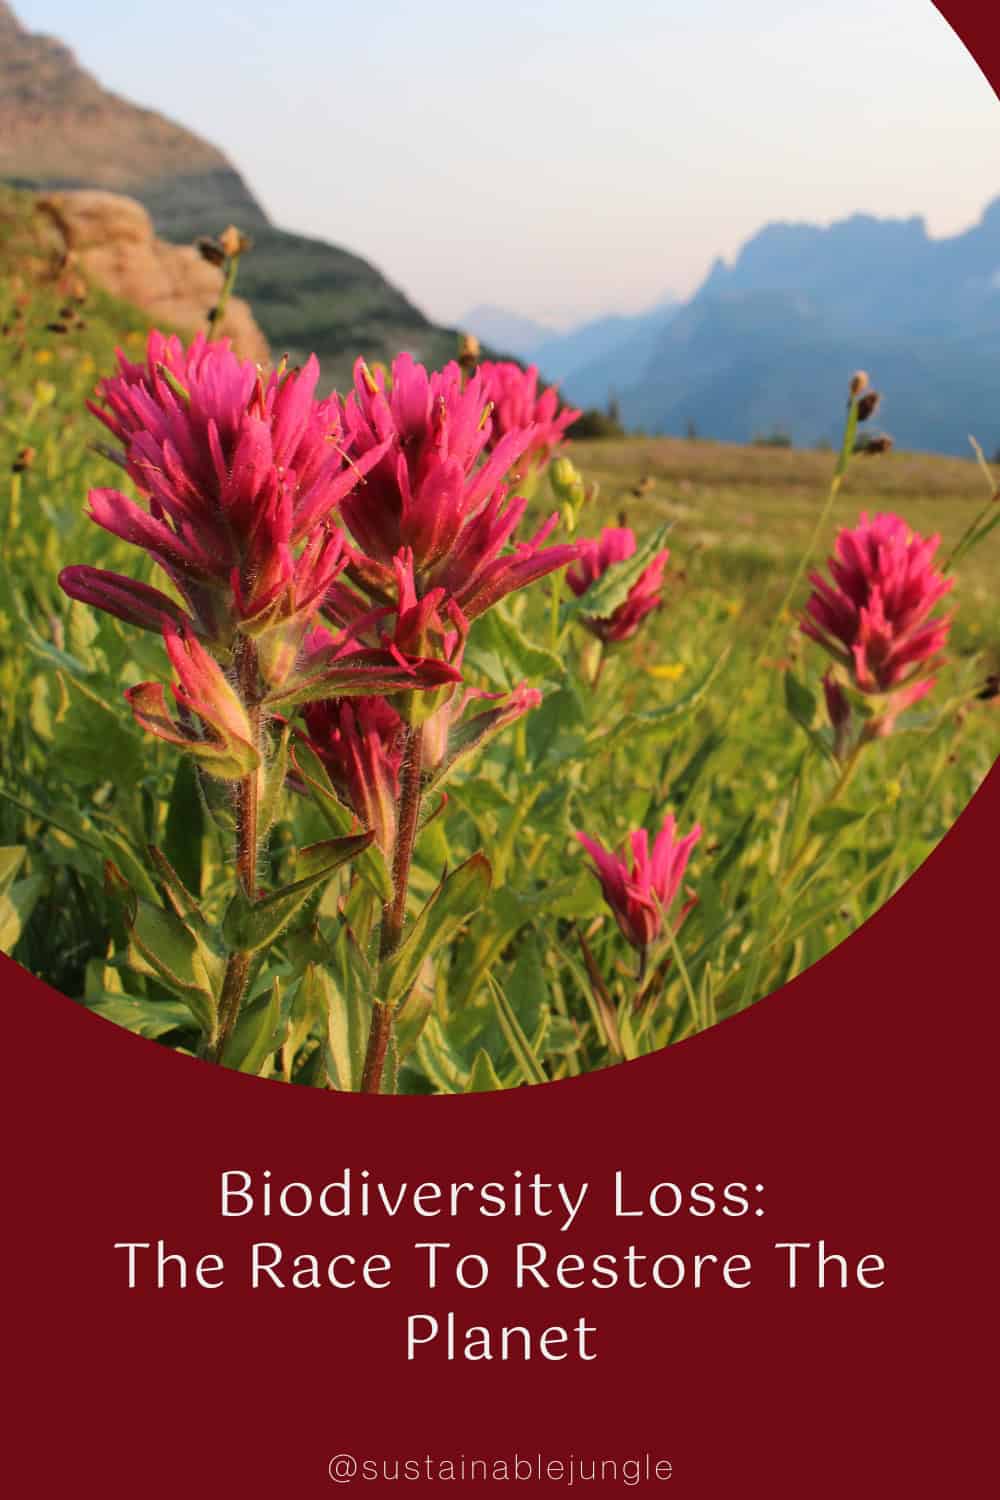 Biodiversity Loss: The Race To Restore The Planet Image by Sustainable Jungle #biodiversityloss #whatisbiodiversityloss #lossofbiodiversity #biodiversitylosscauses #importanceofbiodiversity #solutionstobiodiversityloss #sustainablejungle